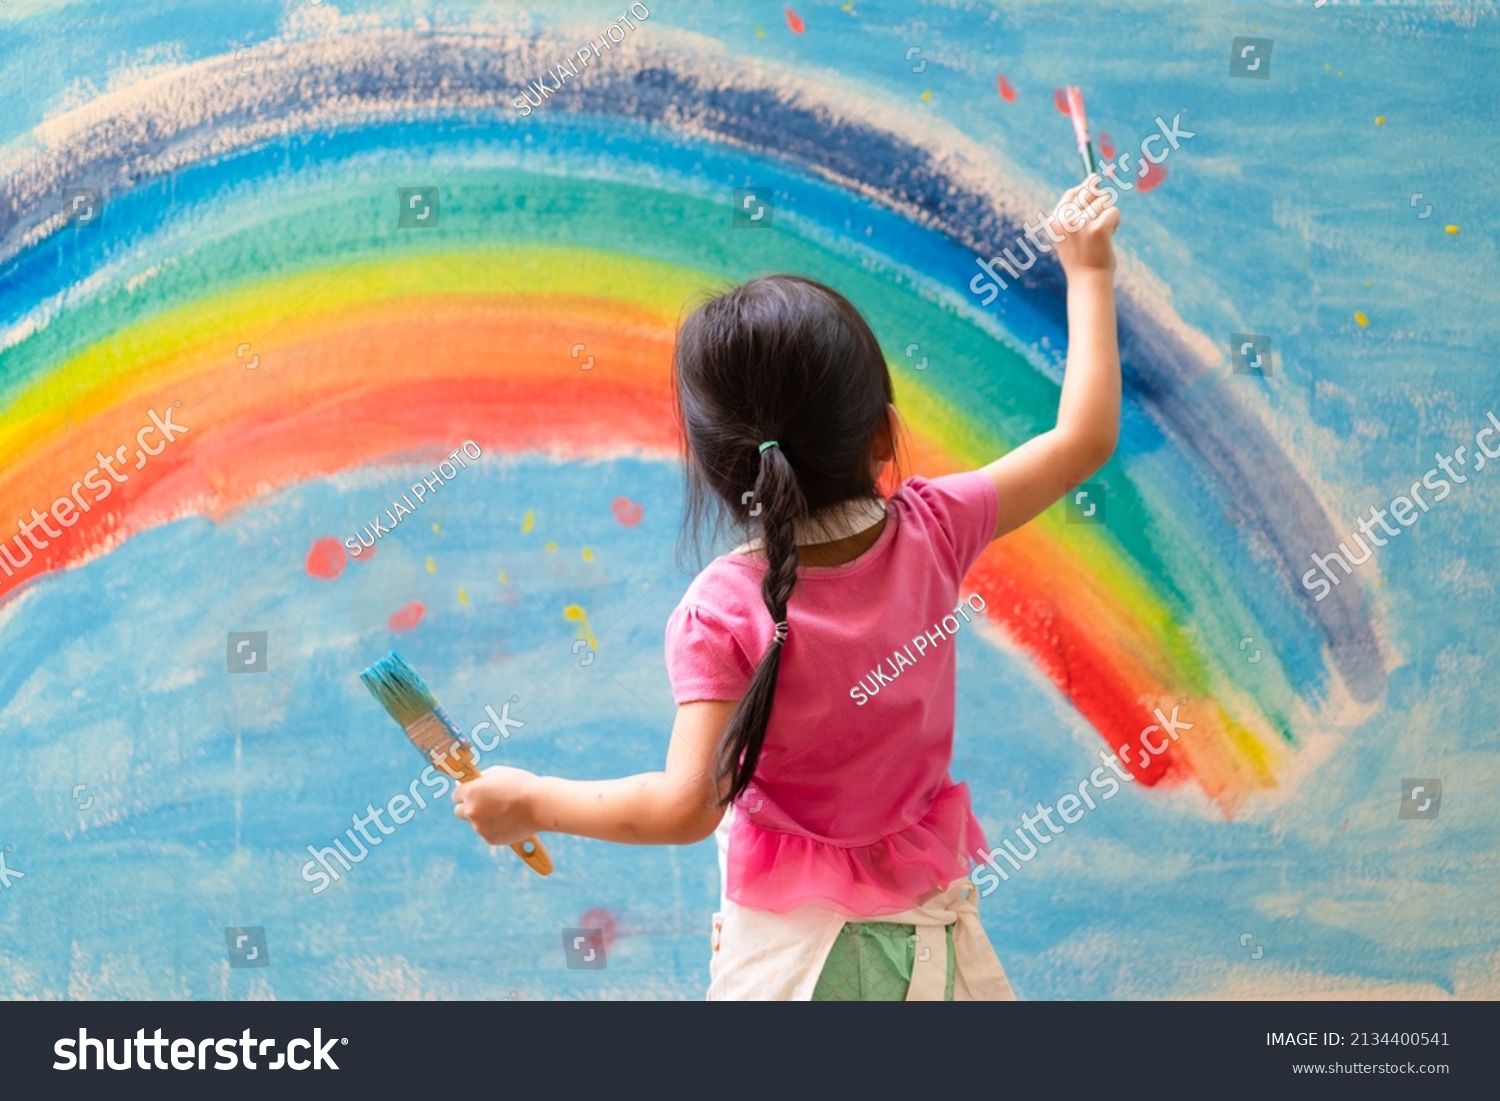 Unidentified little girl is painting the colorful rainbow and sky on the wall and she look happy and funny, concept of art education and learn through play activity for kid development.	 #2134400541